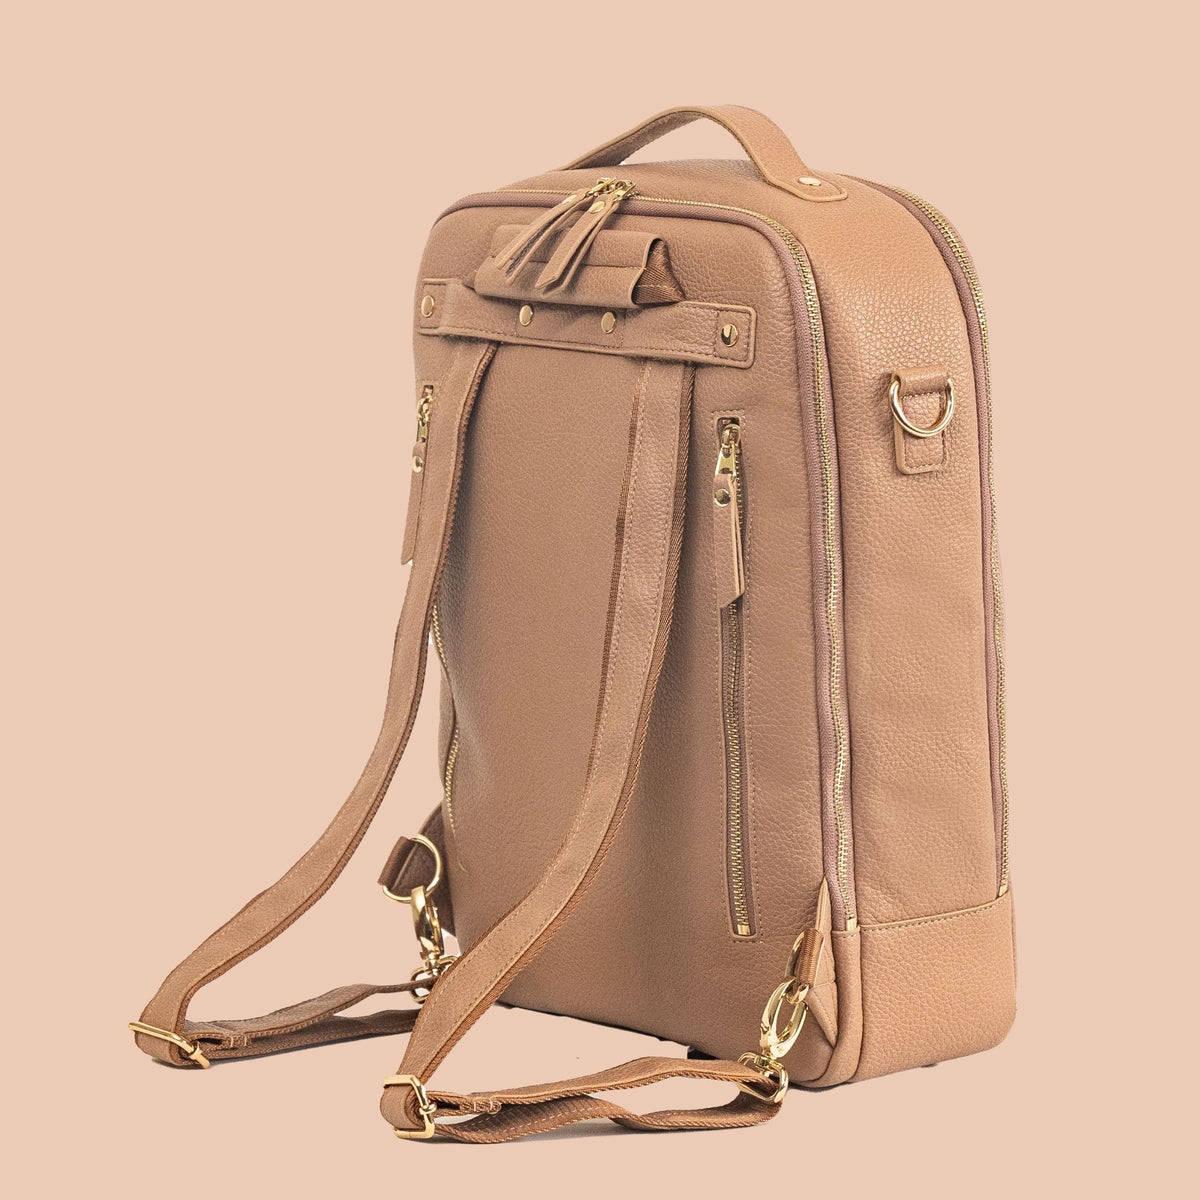 The Wax | Leather Backpack for 17